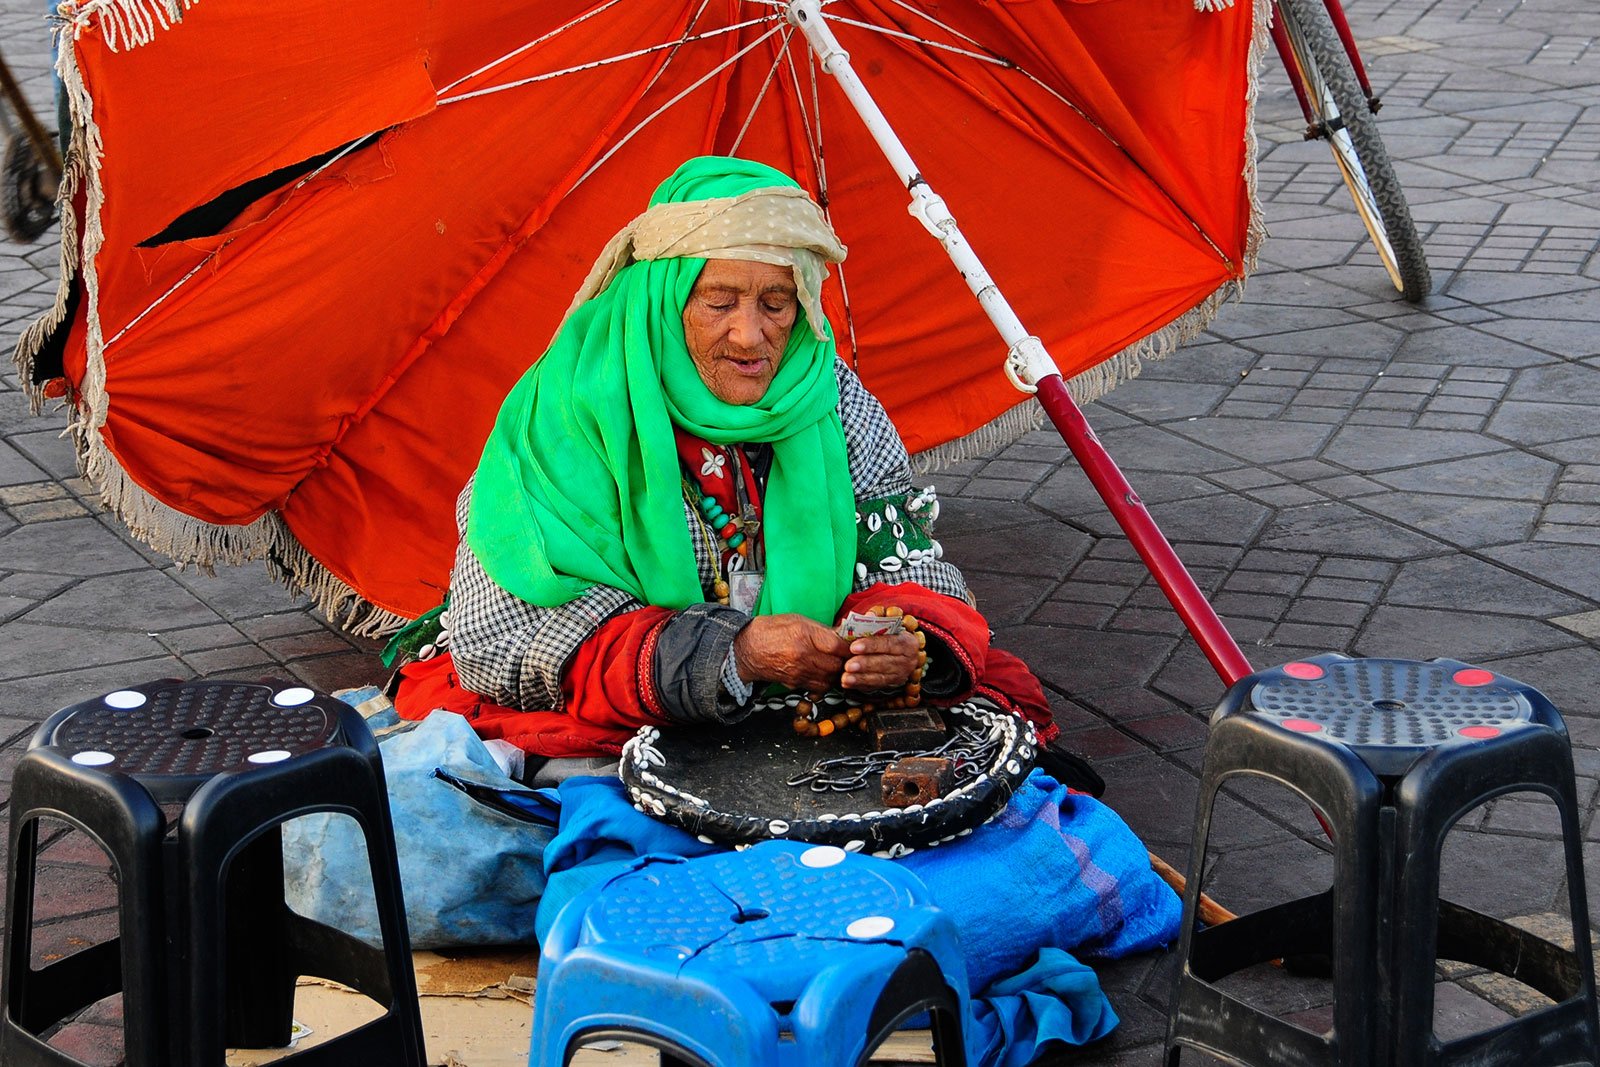 How to learn your future from the fortune teller in Marrakesh